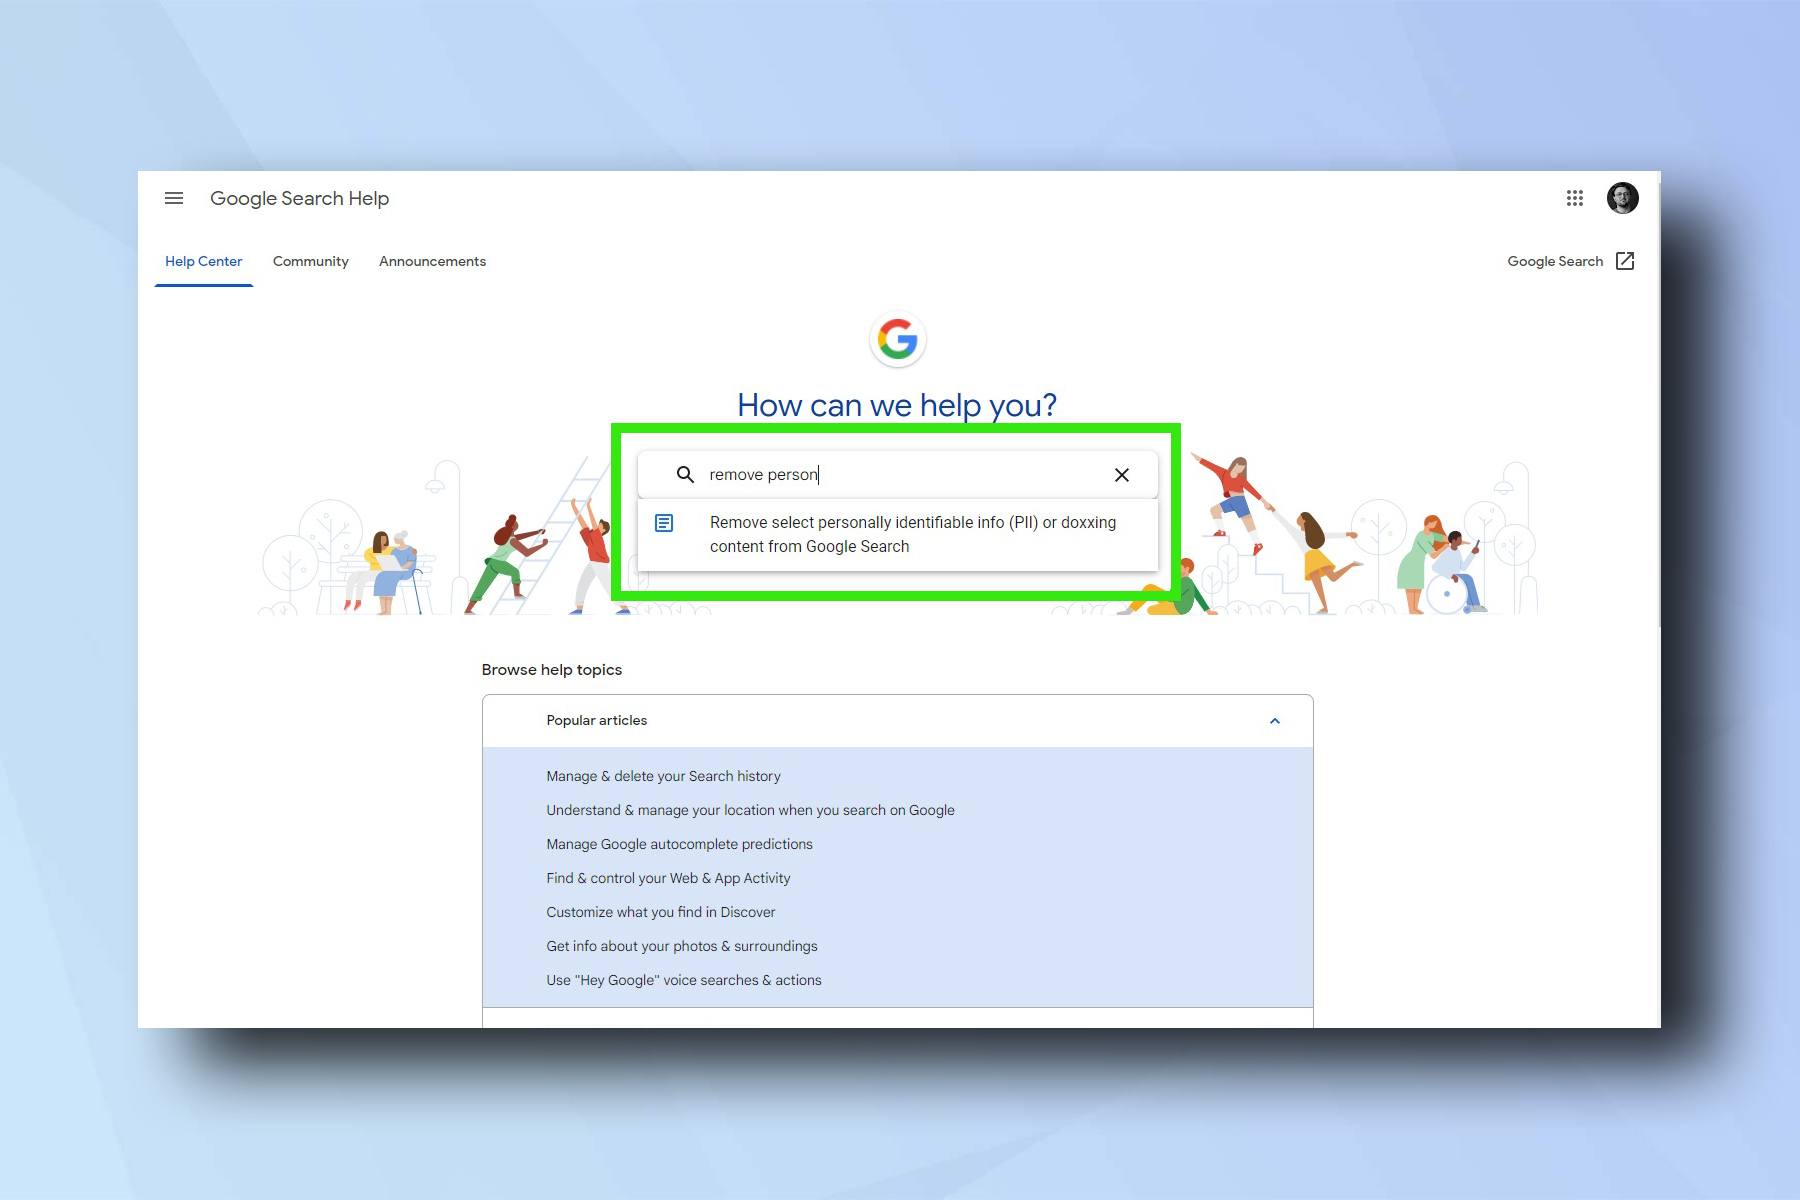 The Google Search help page with text being entered into the search bar - demonstrating how to remove contact details from Google Search